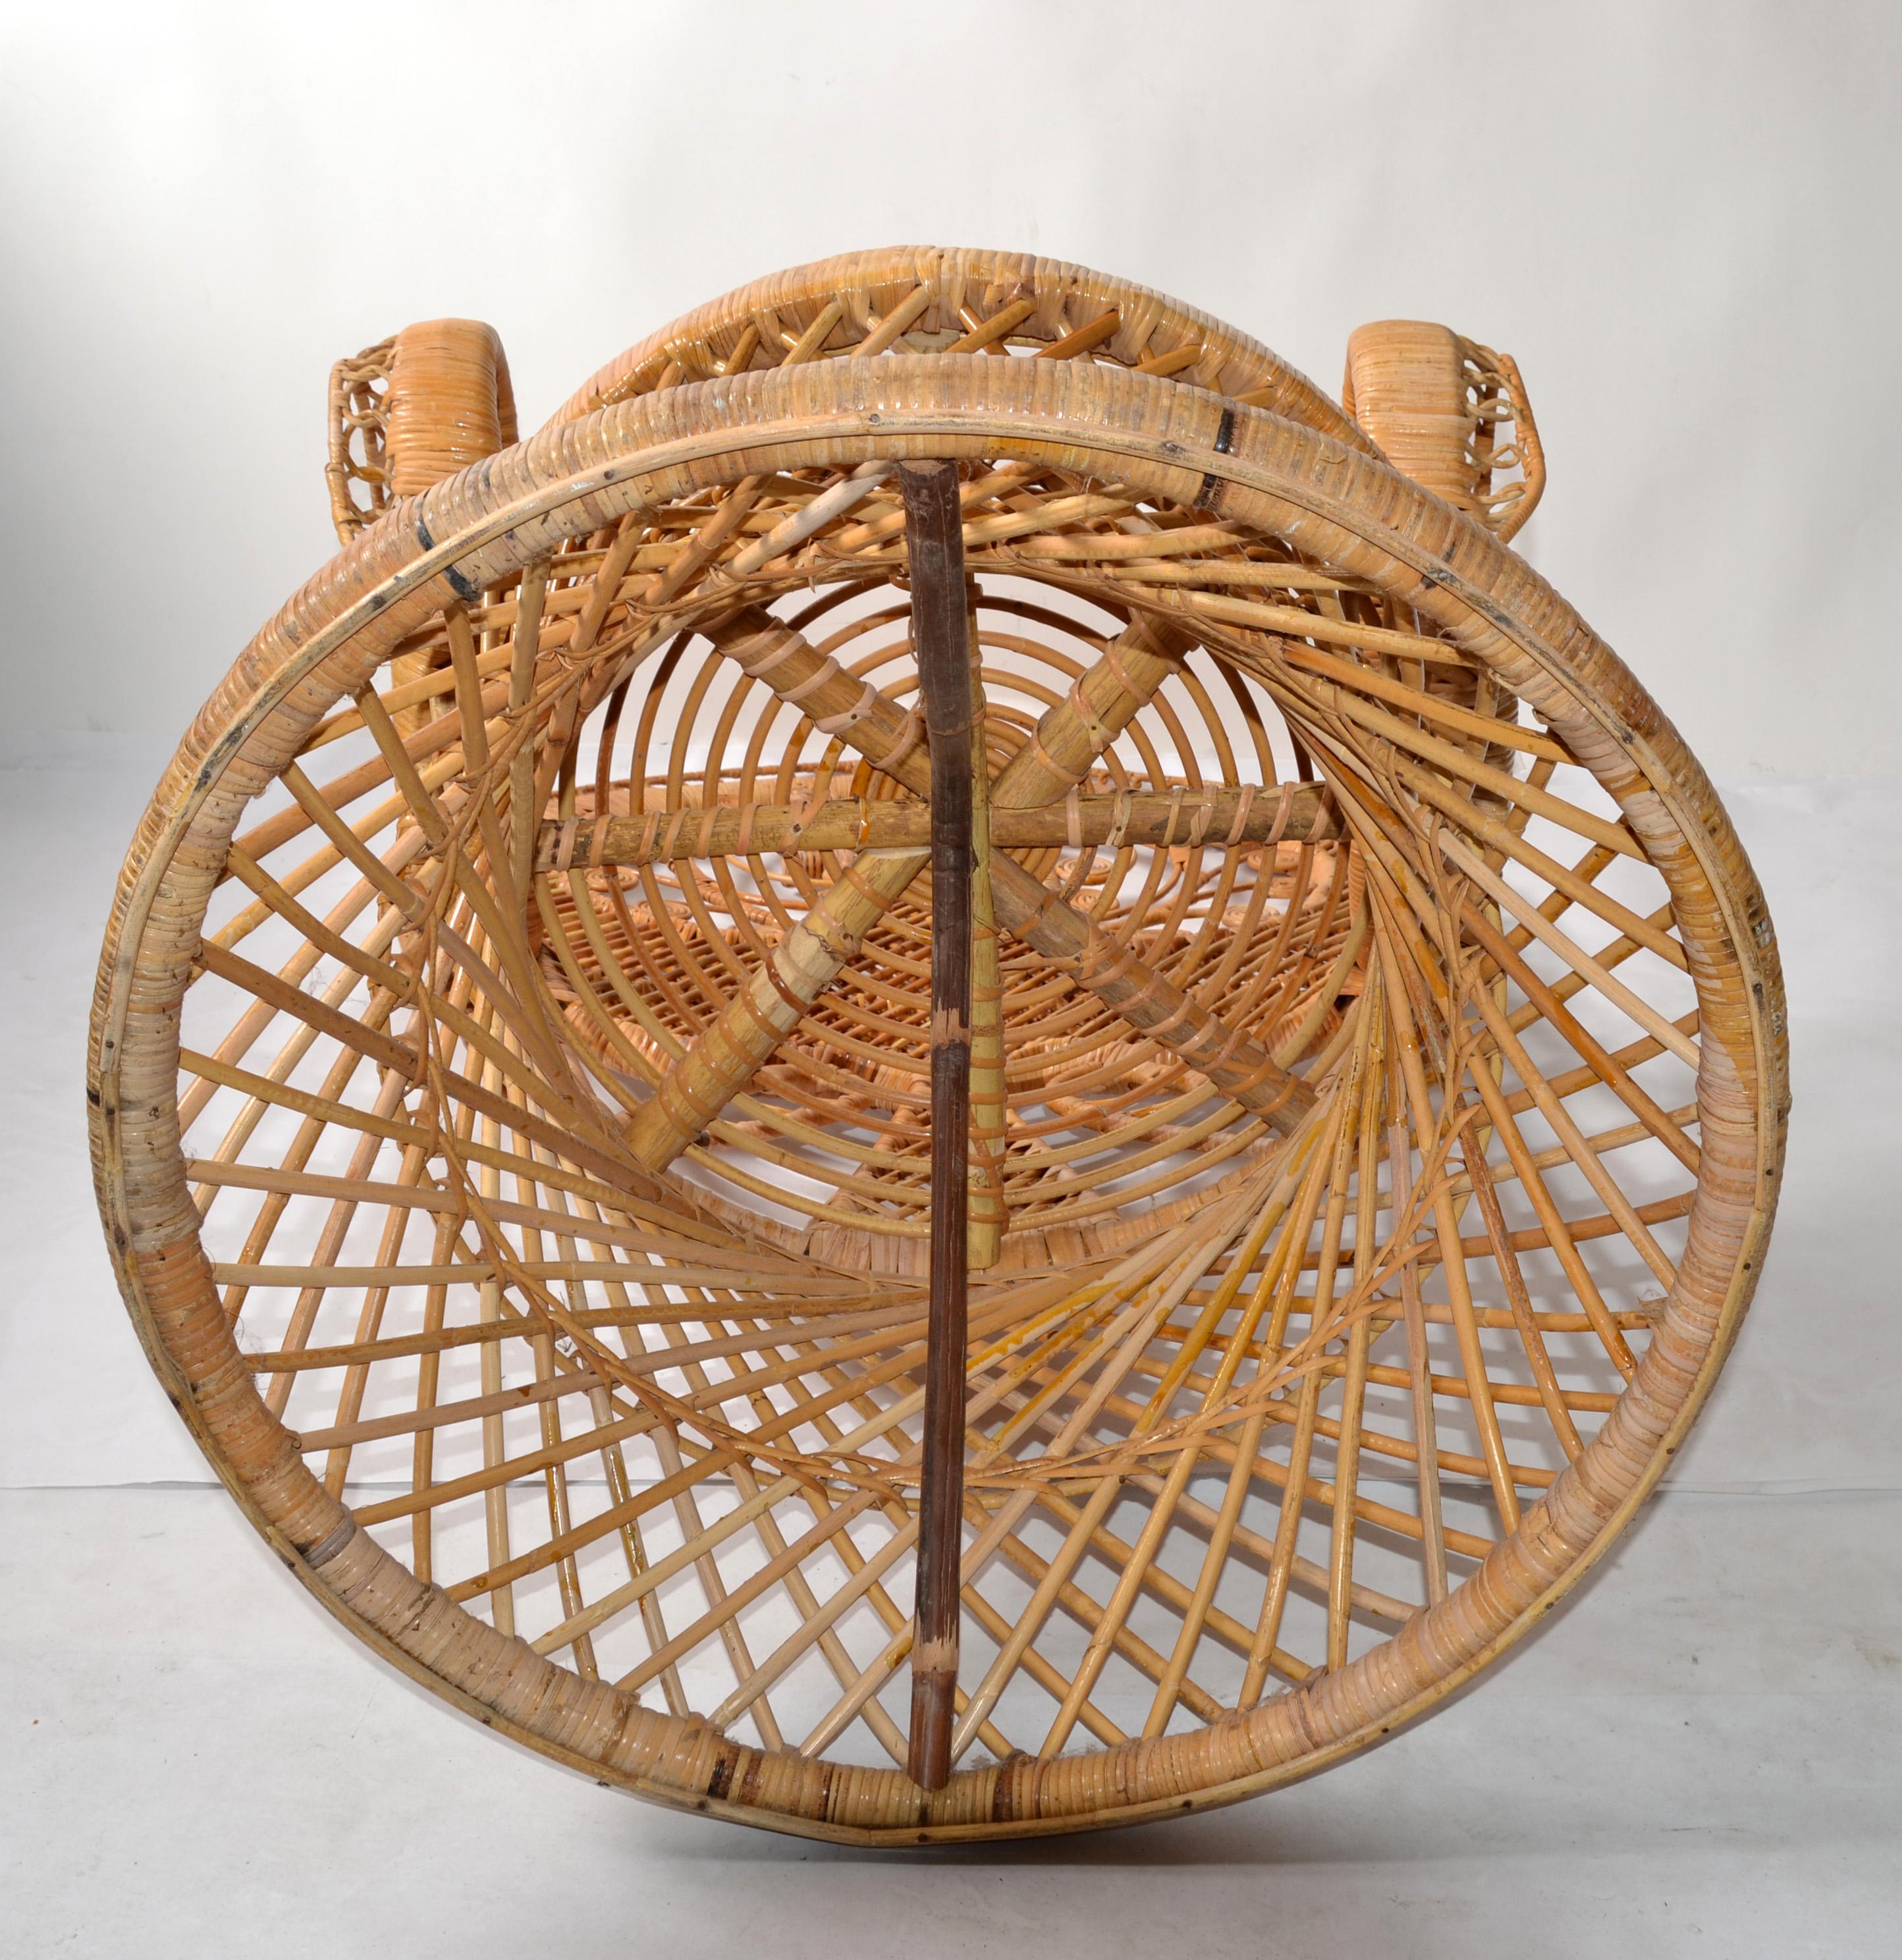 Coastal Vintage Round Rattan Accent Table Hand-Woven Wicker Caning Peacock Chair For Sale 6